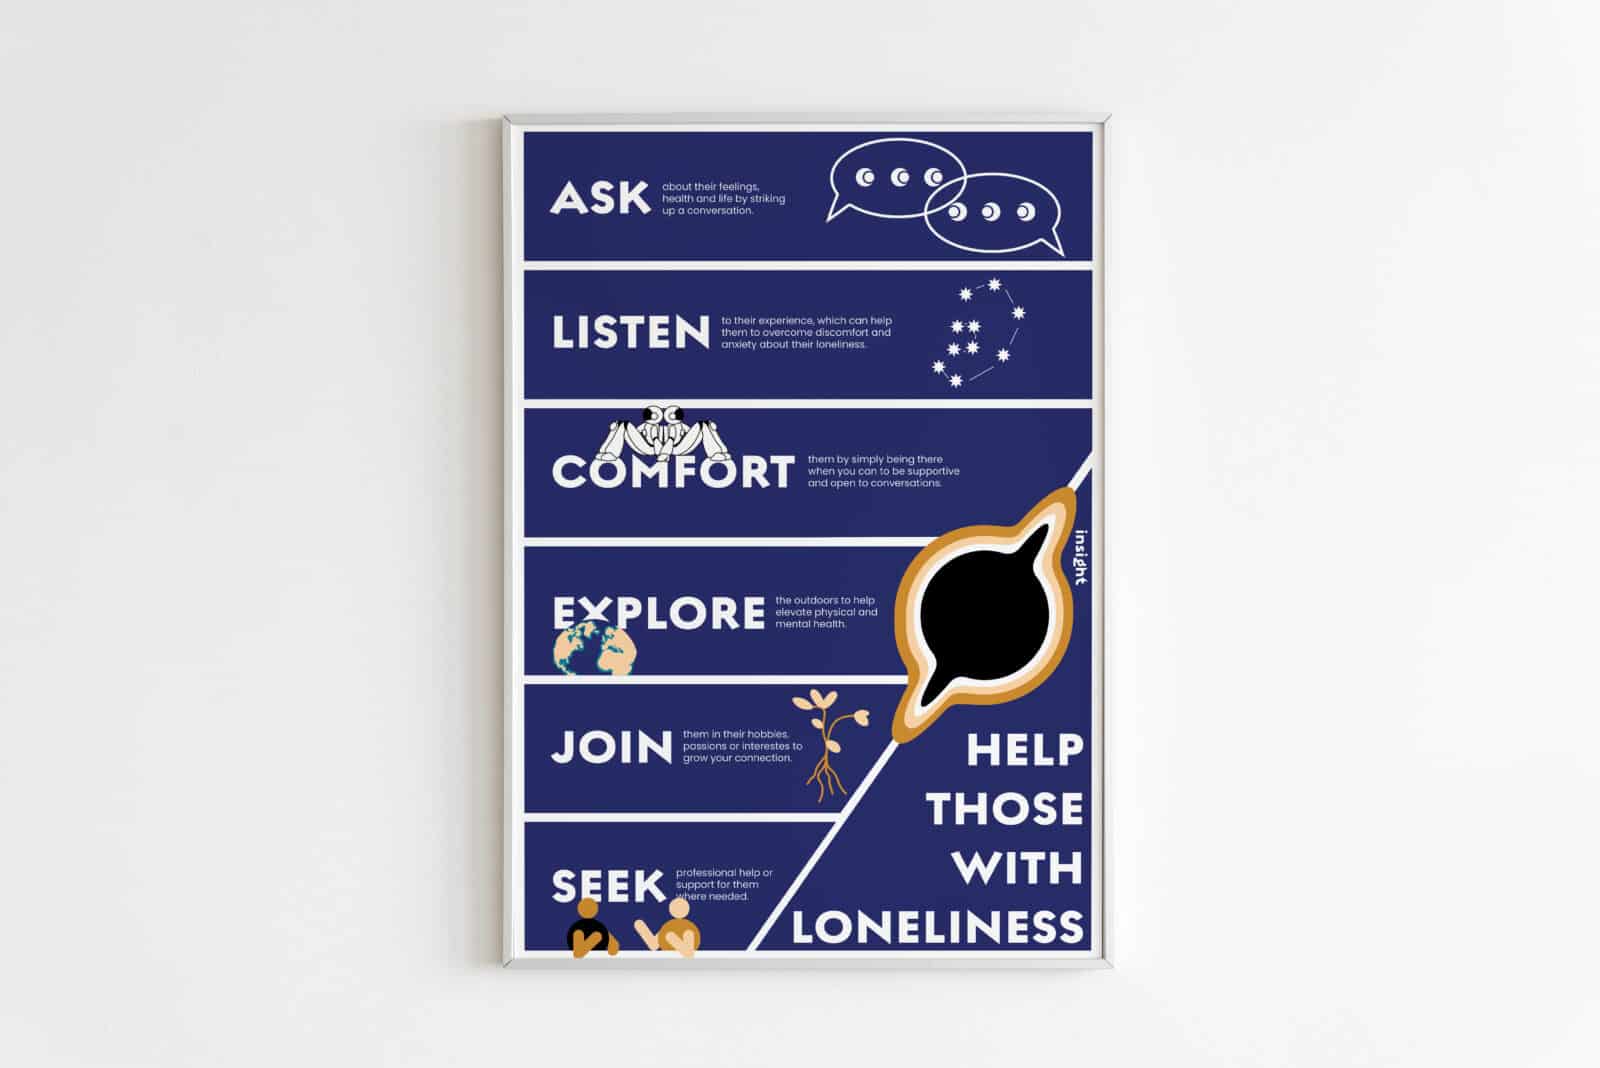 Loneliness information poster